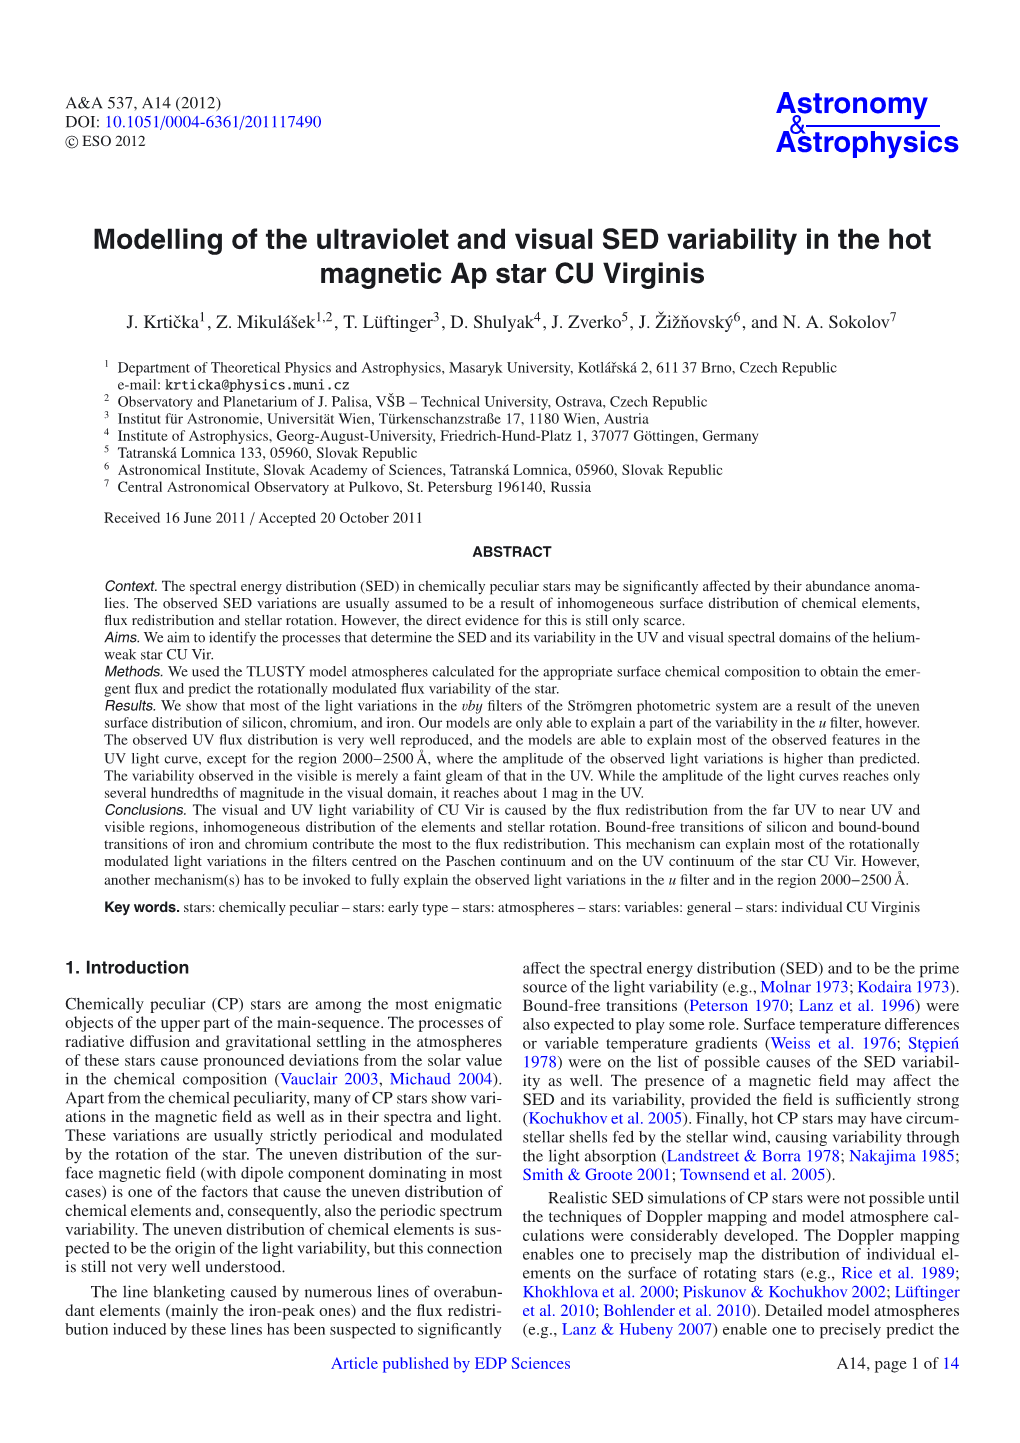 Modelling of the Ultraviolet and Visual SED Variability in the Hot Magnetic Ap Star CU Virginis